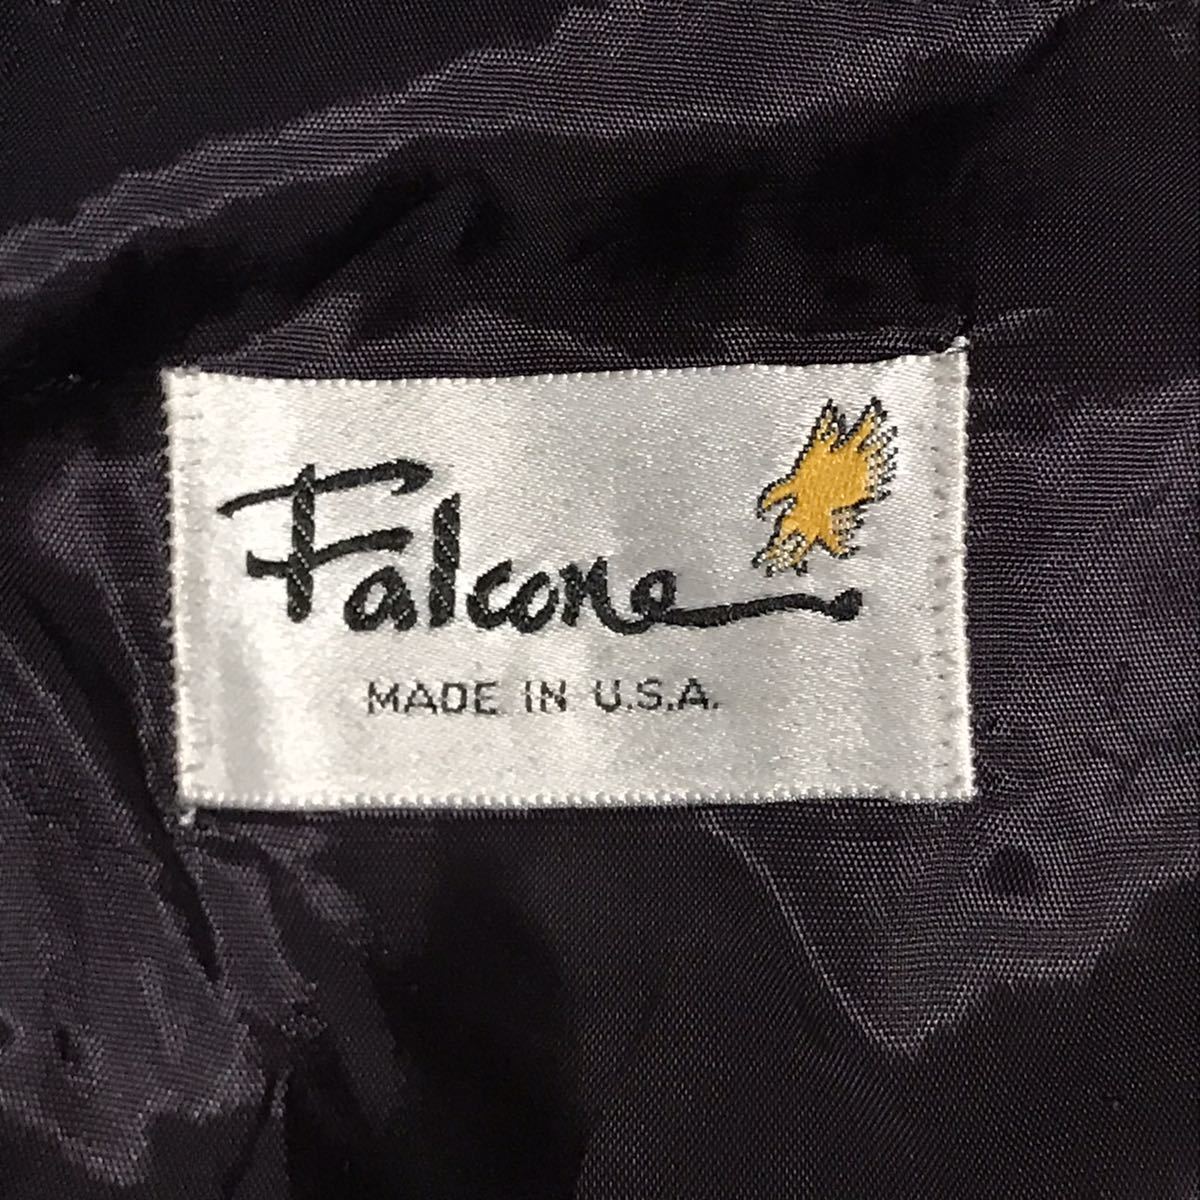 USED 90s FALCONE NATIVE PATTERN JACKET MADE IN USA 中古 90's ネイティブ柄 テーラード ジャケット アメリカ製 L サイズ 送料無料